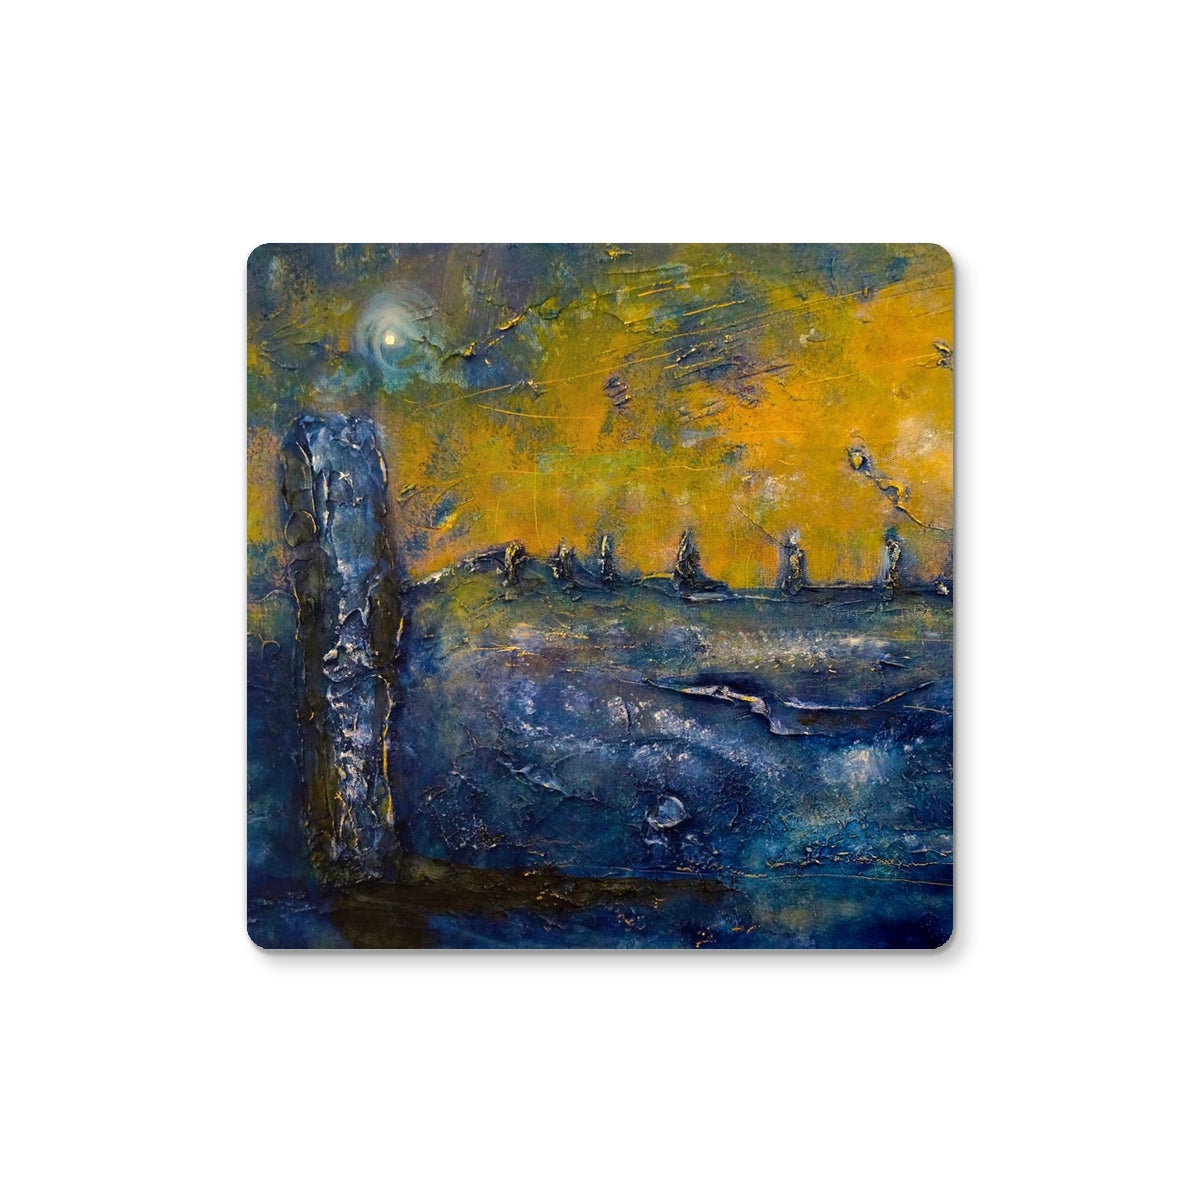 Brodgar Moonlight Orkney Art Gifts Coaster-Coasters-Orkney Art Gallery-2 Coasters-Paintings, Prints, Homeware, Art Gifts From Scotland By Scottish Artist Kevin Hunter